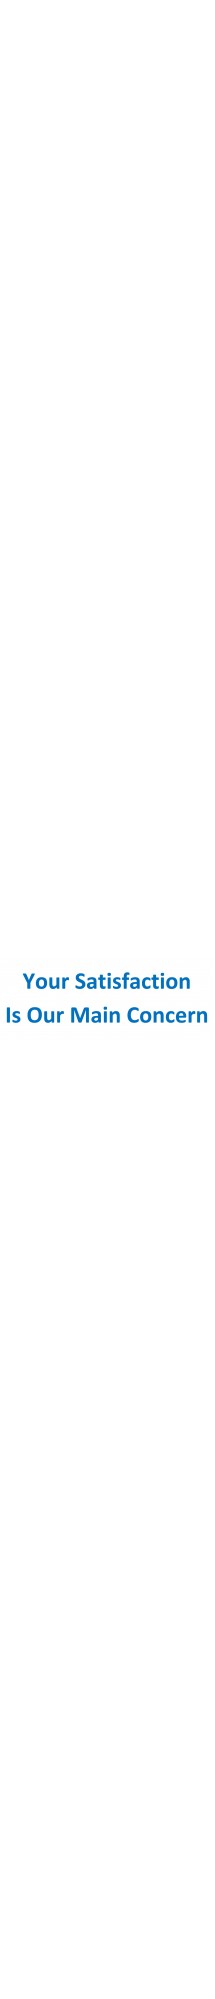 Your Satisfaction is Our Main Concern